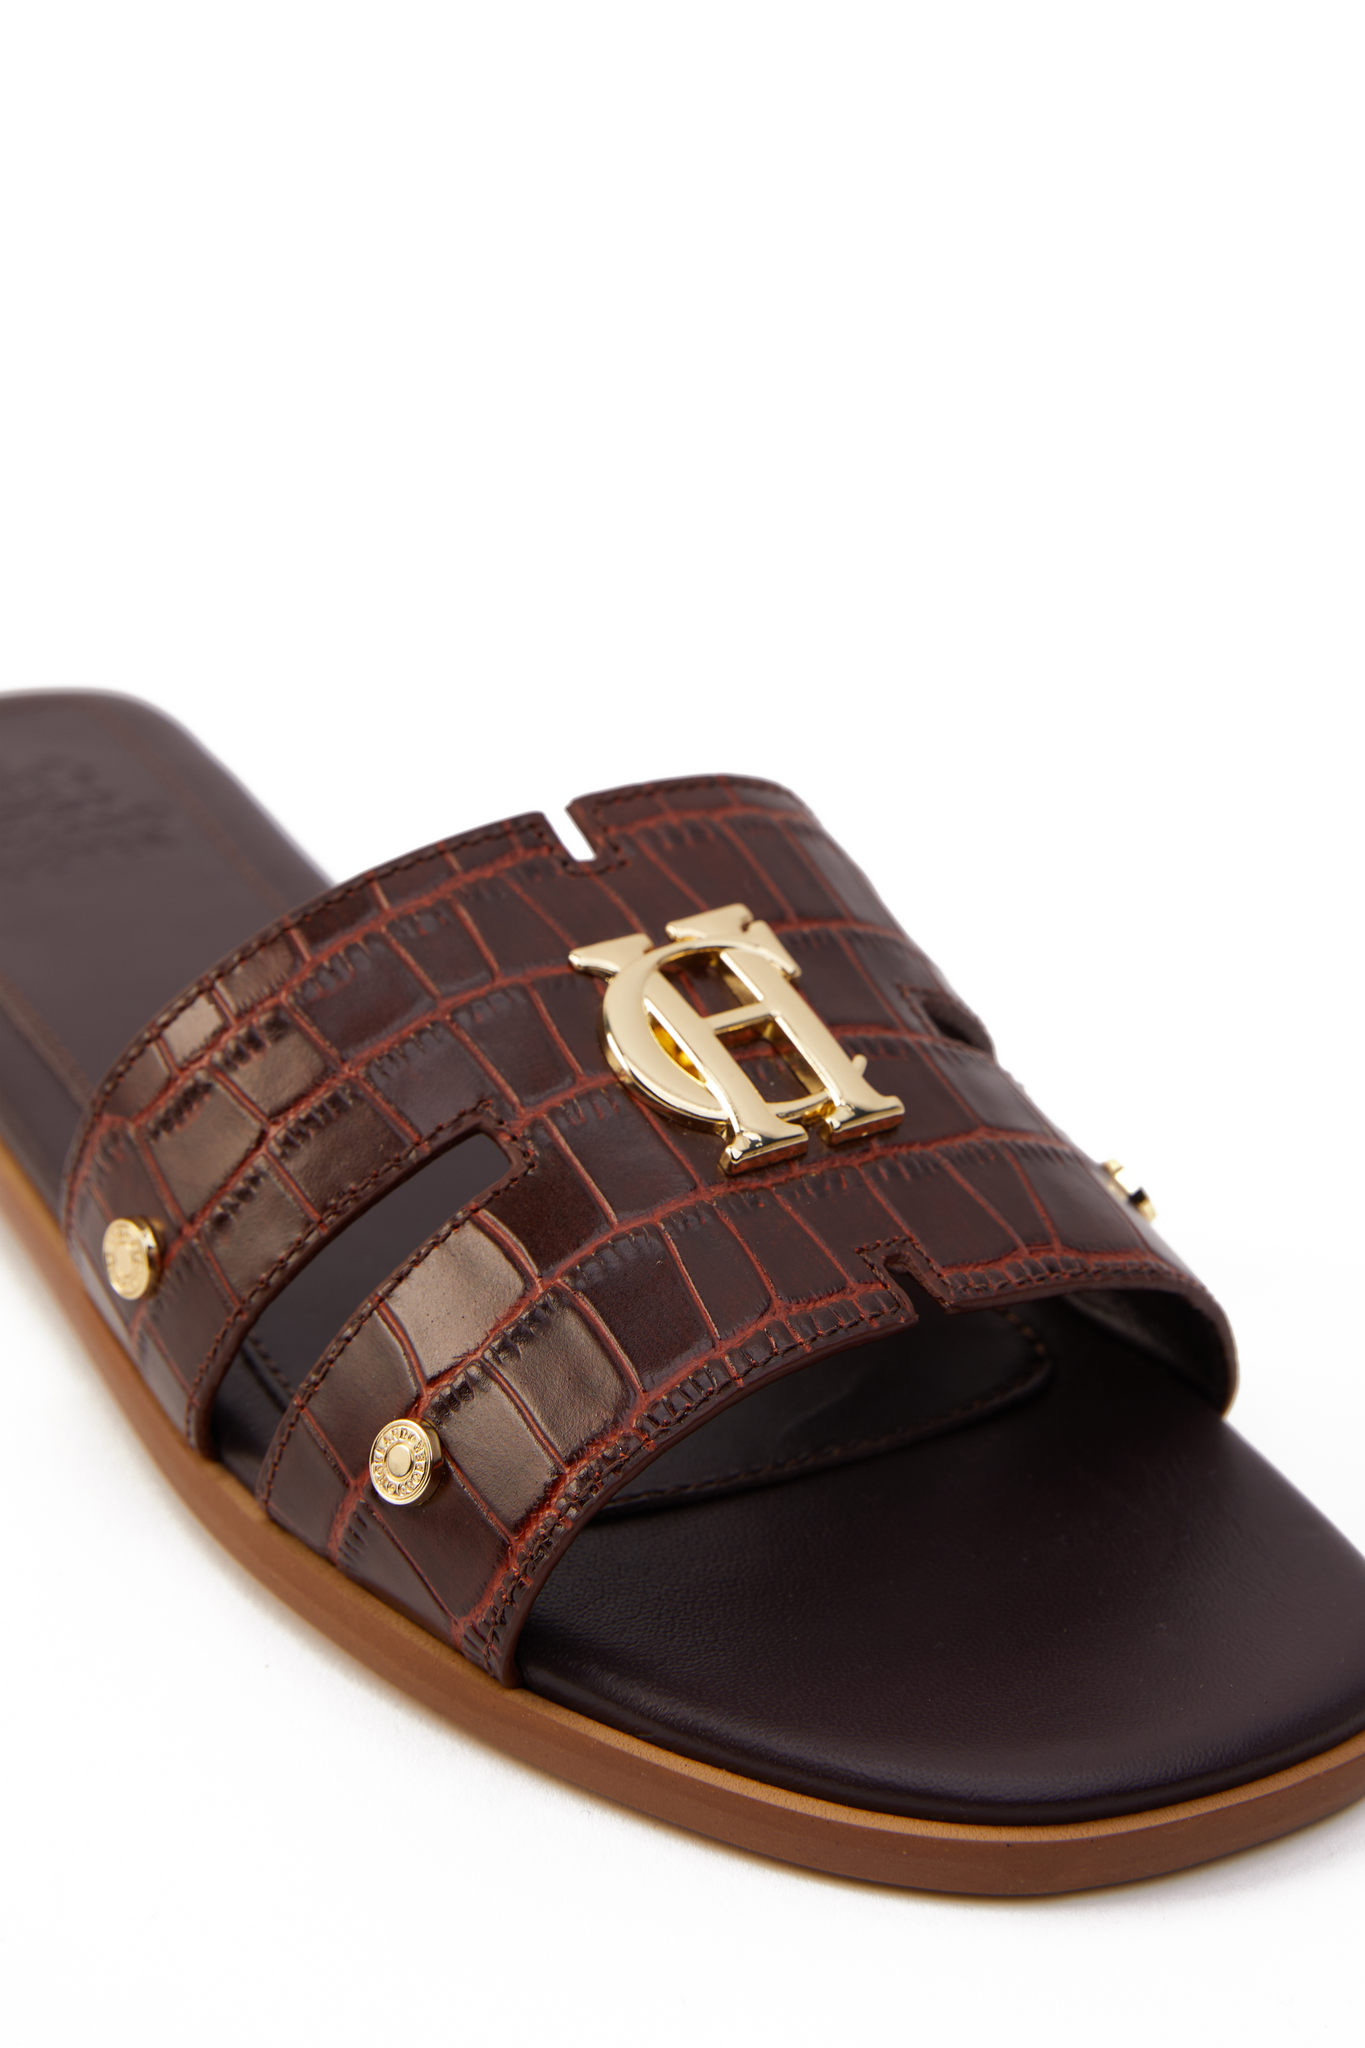 Close up of brown croc embossed leather sliders with a tan leather sole and gold hardware